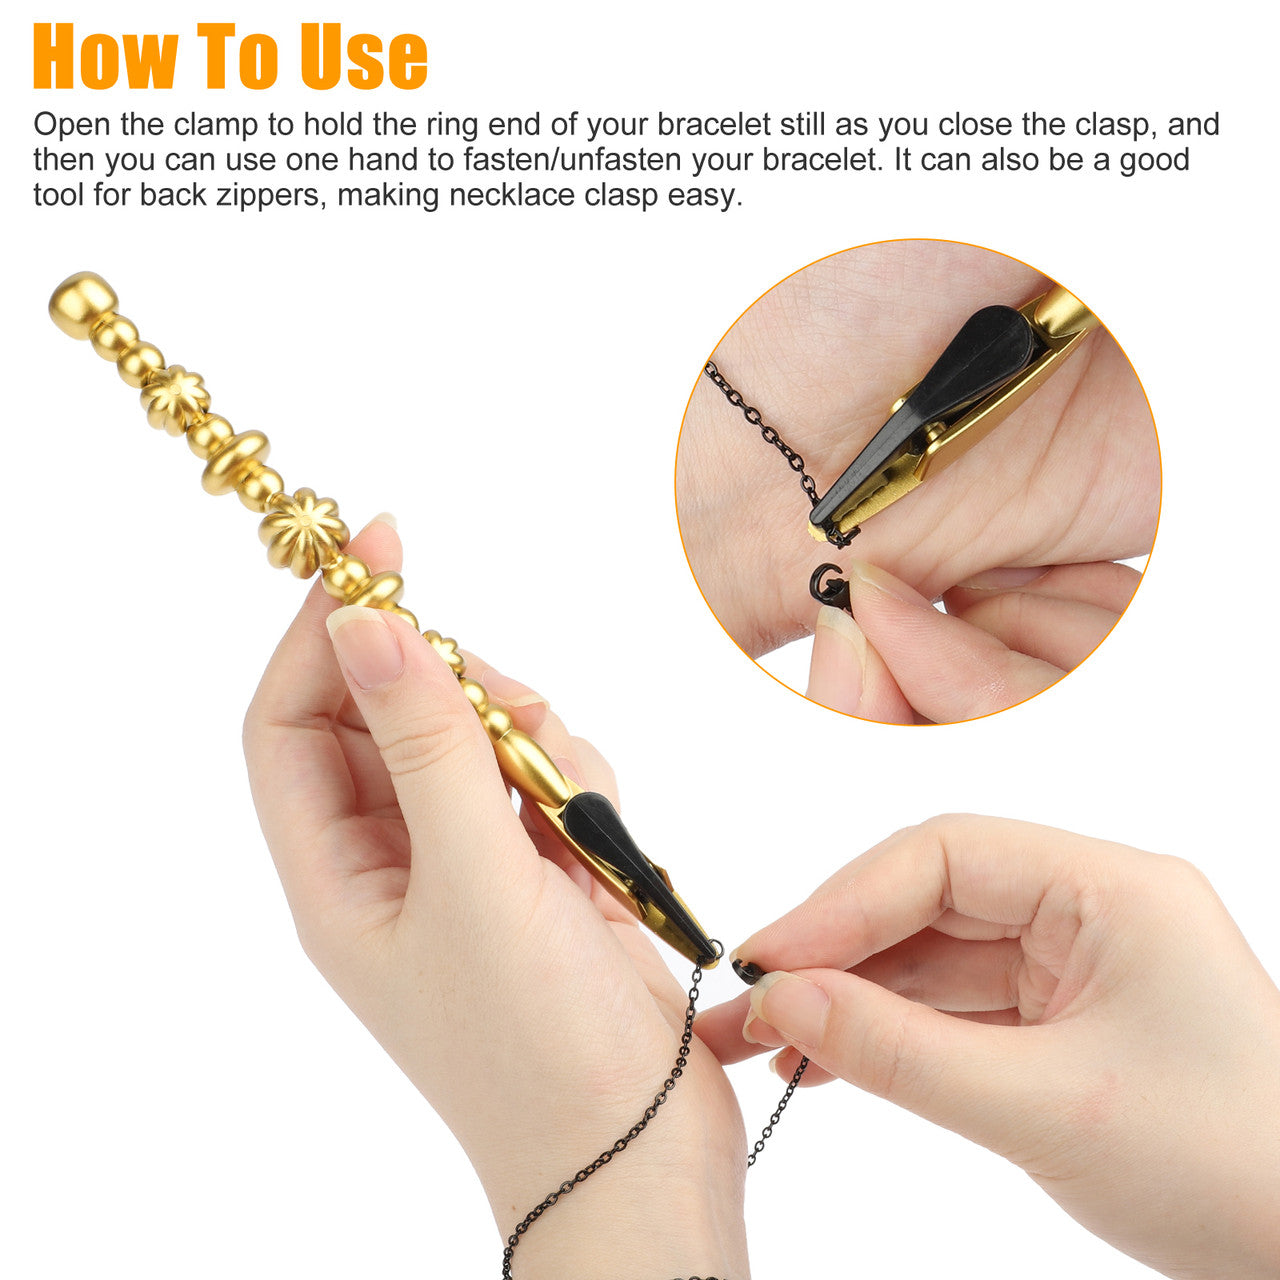 2 Pcs Hand Bracelet Wearing Helper Stick Tool - Long Clamp Fixed Hand Chain Aids with Bracelet Ties Watch Clasps Zippers (Gold+Silver)